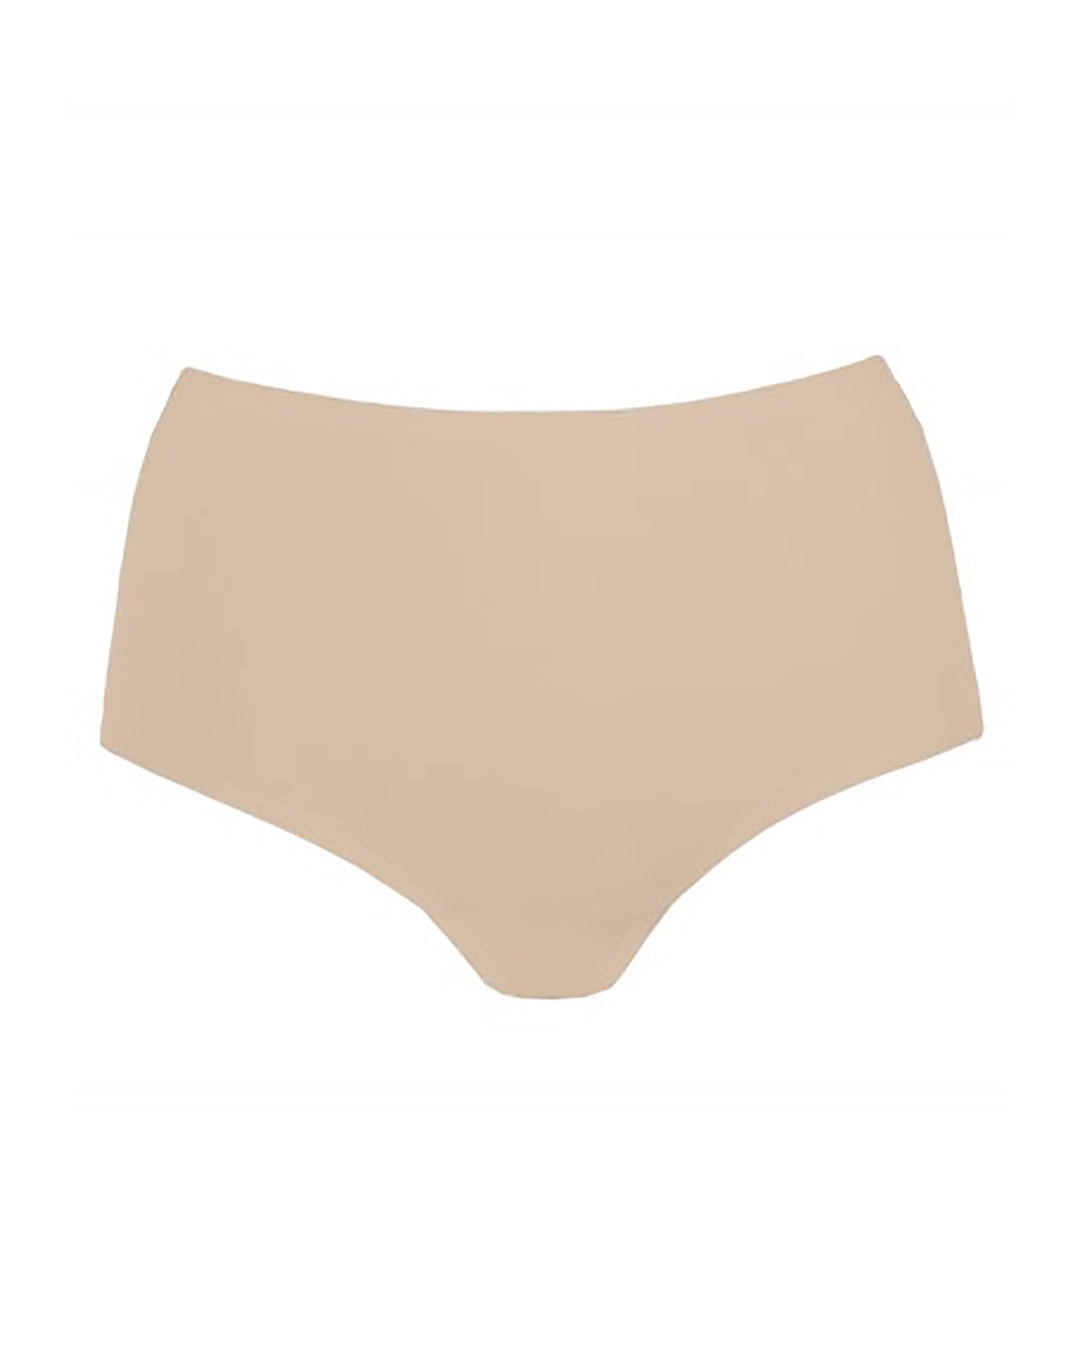 CORIN KYLIE NUDE SEAMLESS ONE SIZE FULL BRIEF | Specialty Fittings Lingerie